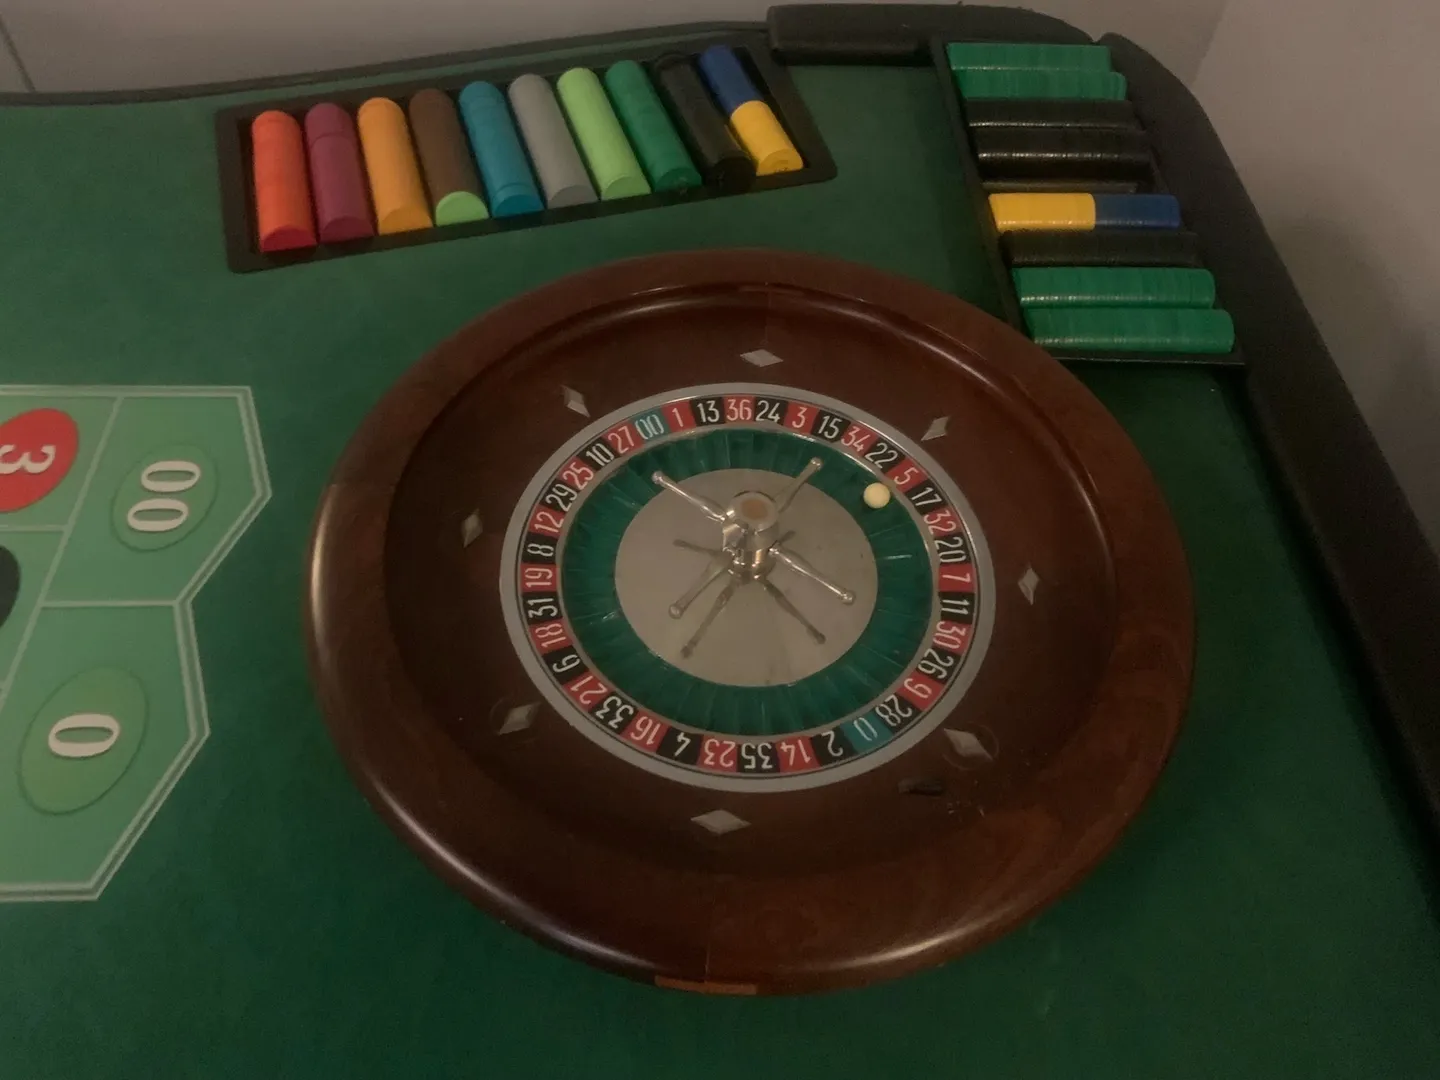 A roulette wheel and some colored chips on the table.